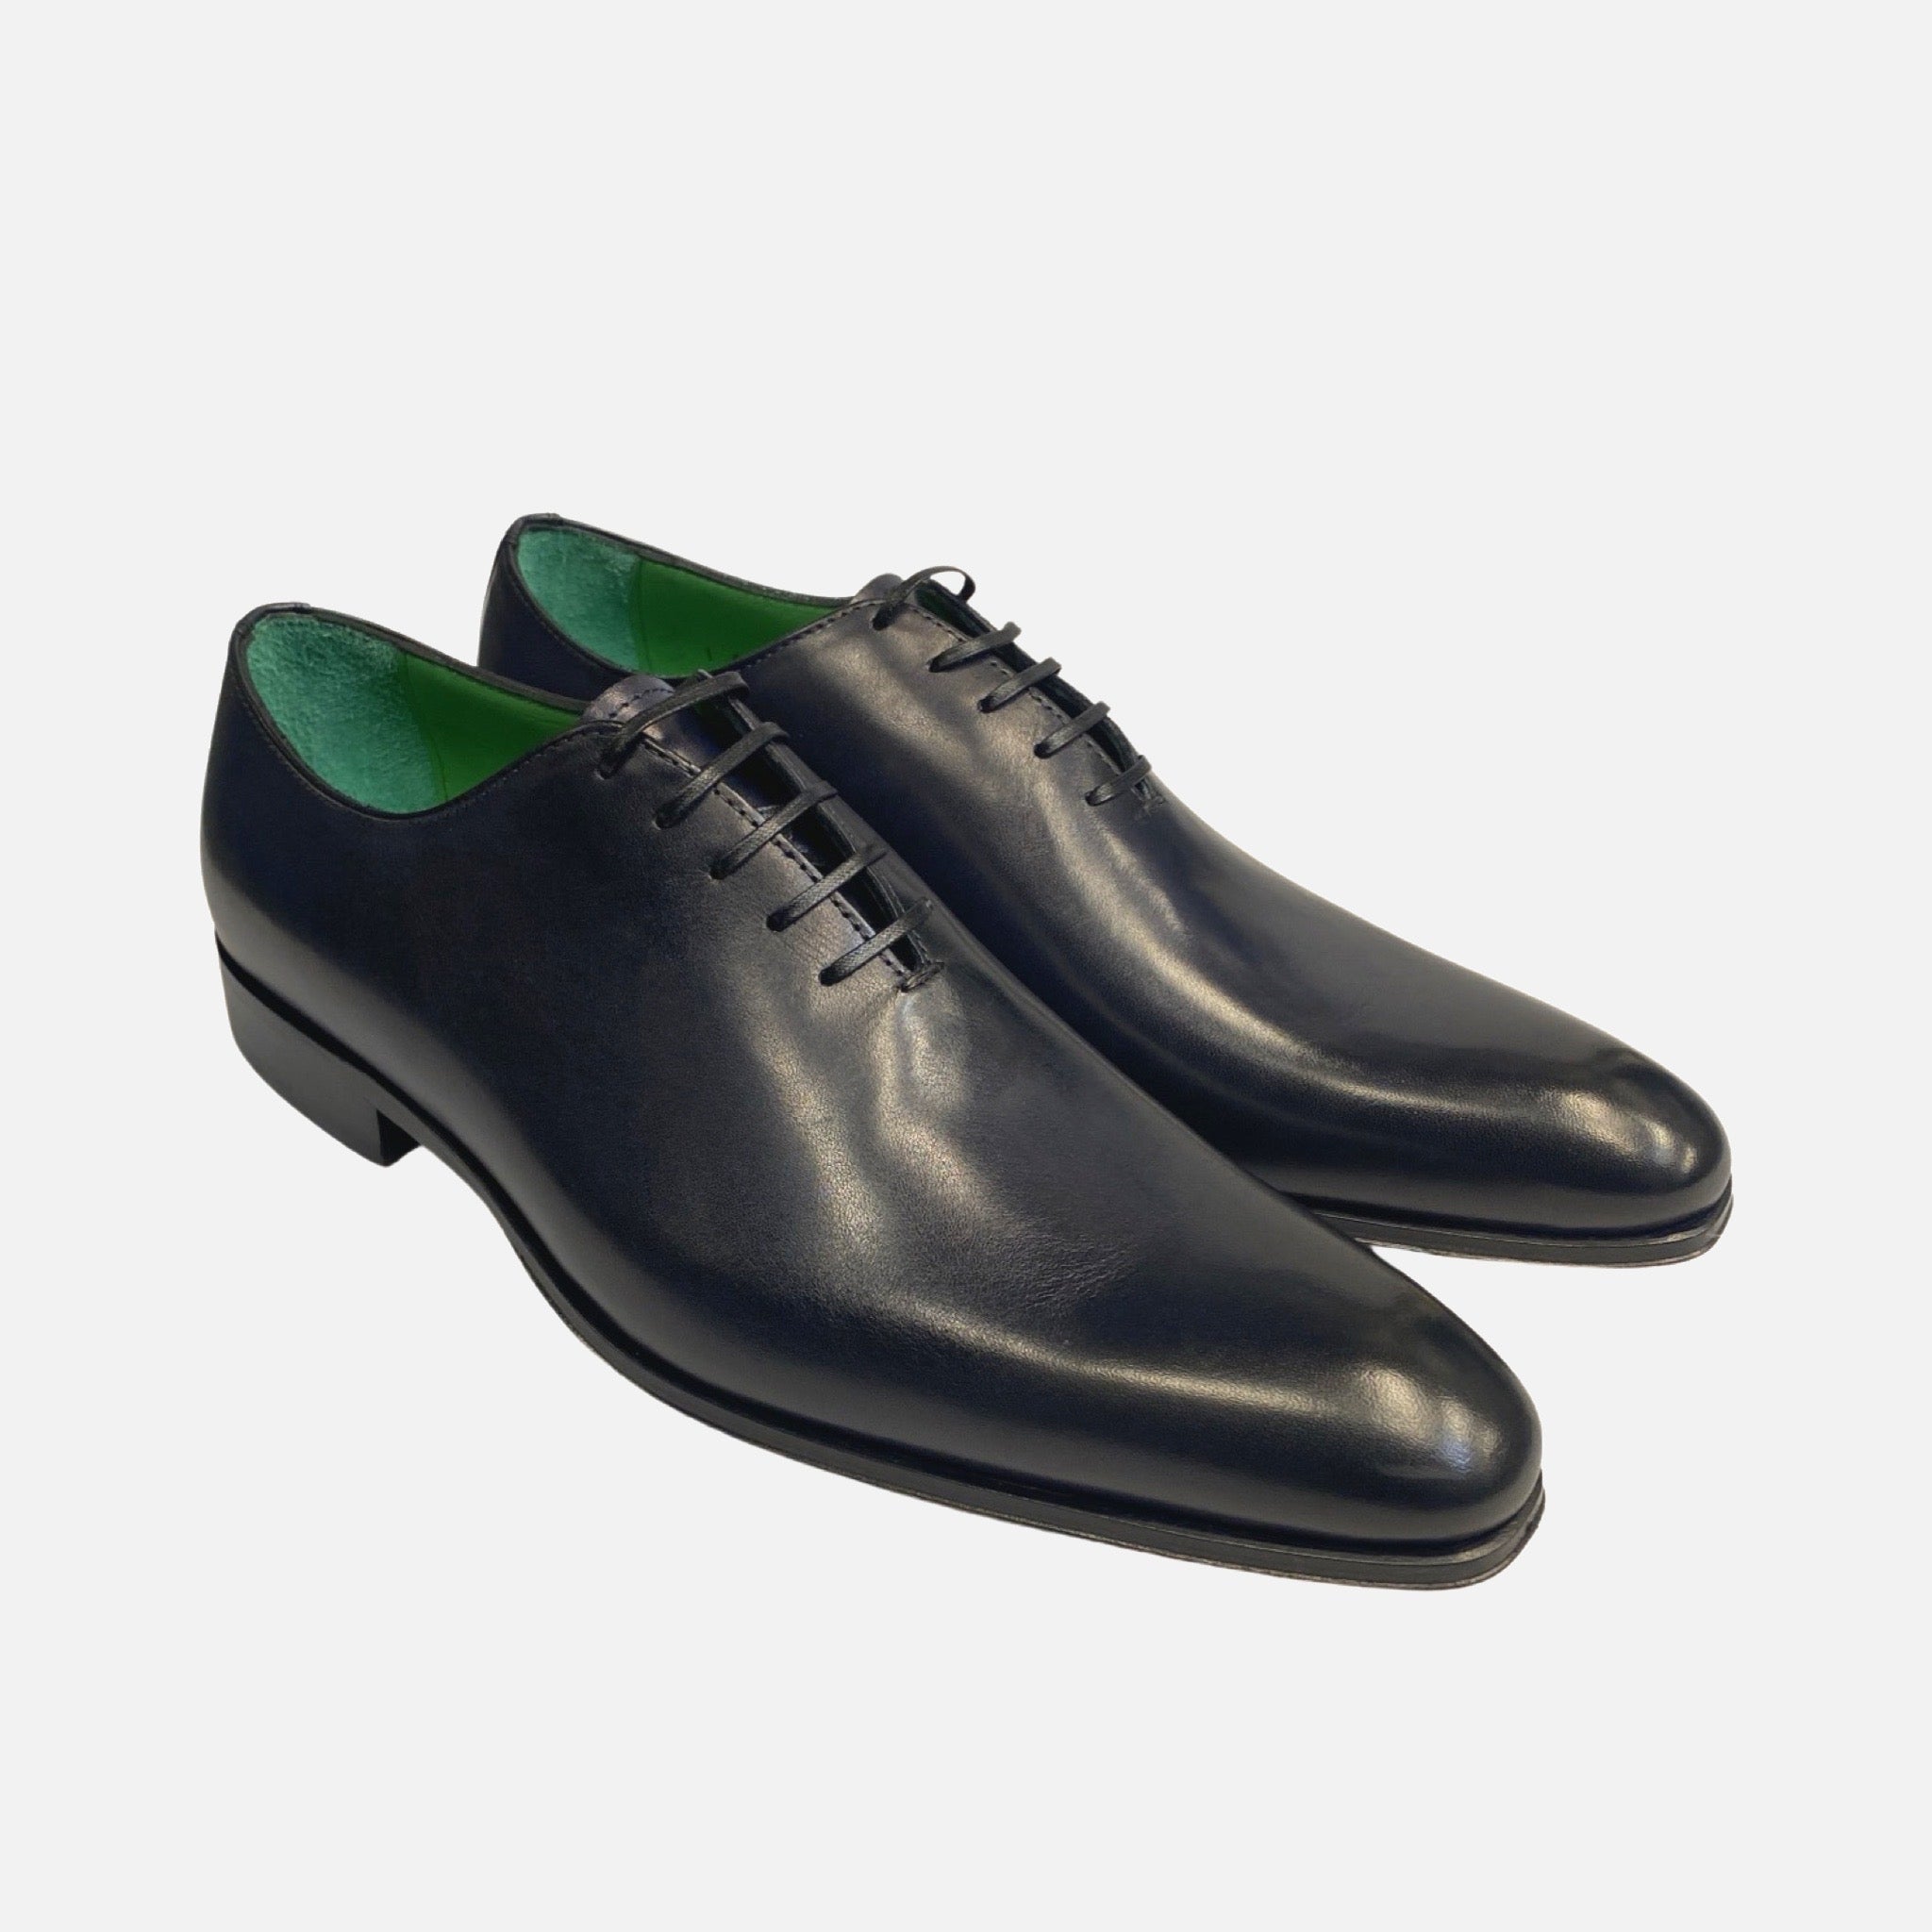 Jose Real Italian Deep Blue Shoes I508 - Handcrafted Excellence from Italy